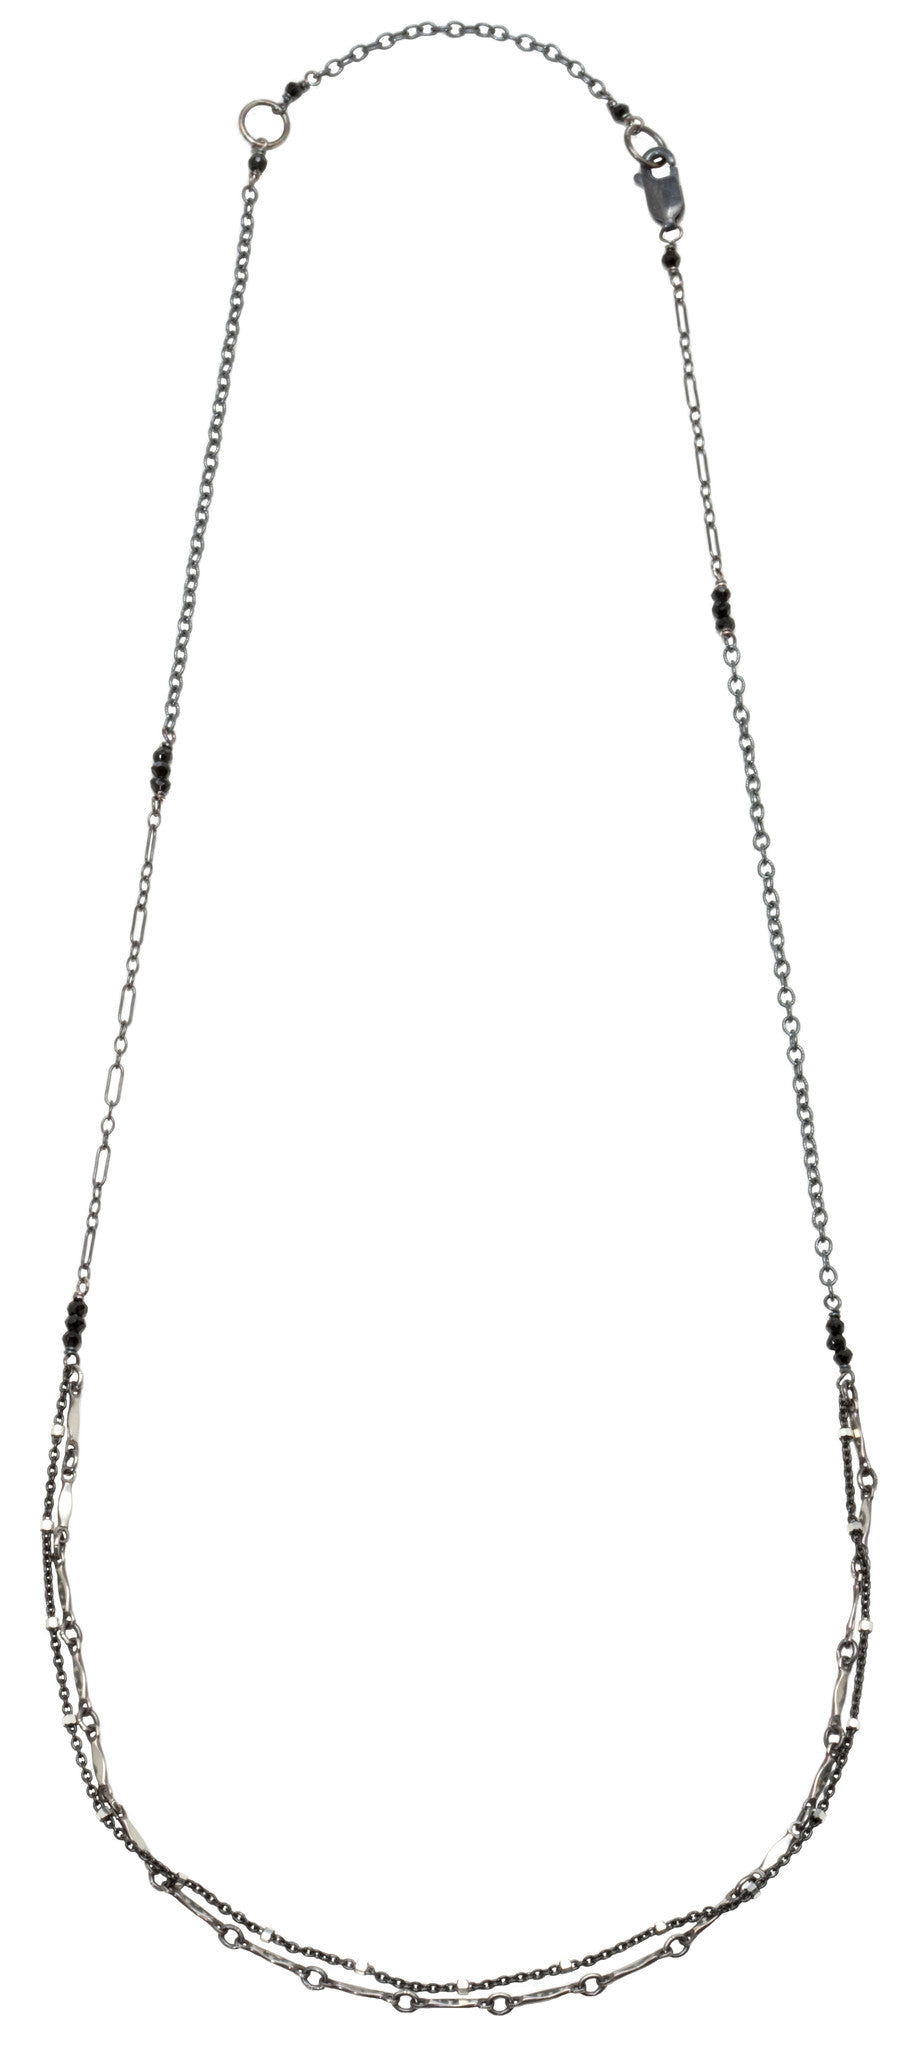 Layering chain necklace - black and silver